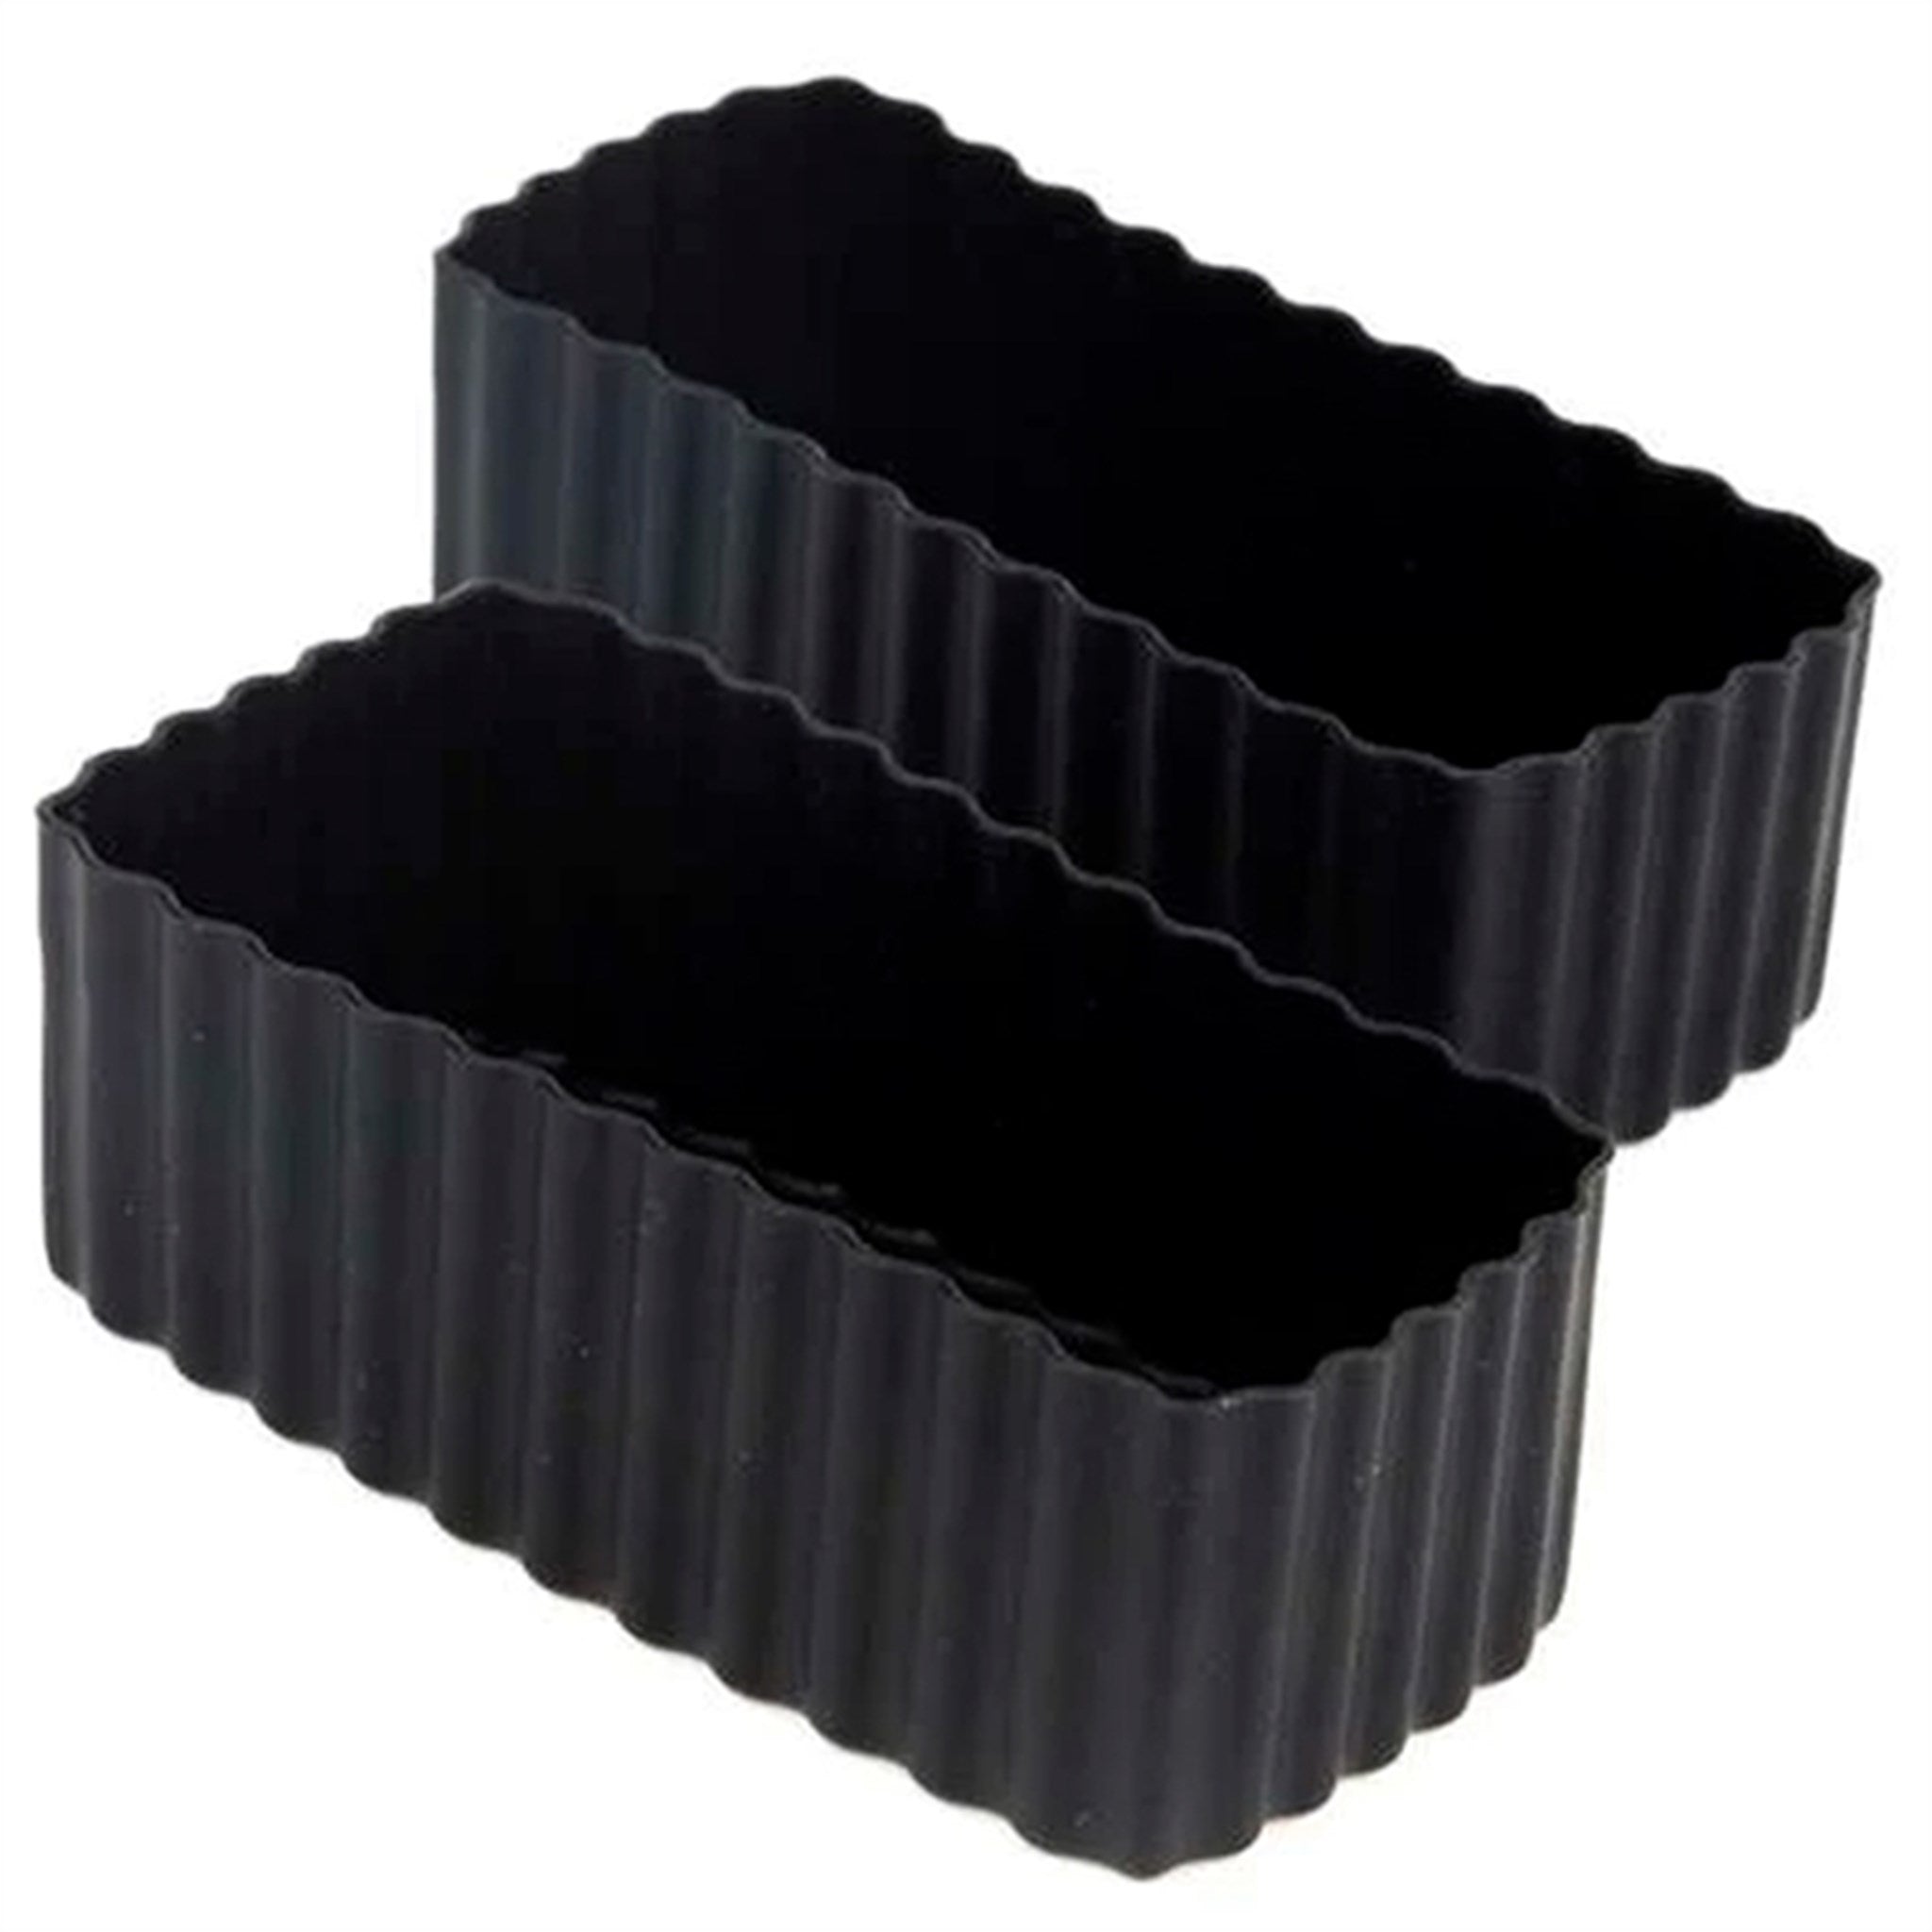 Little Lunch Box Co Bento Silicone Cups Rectangular Black